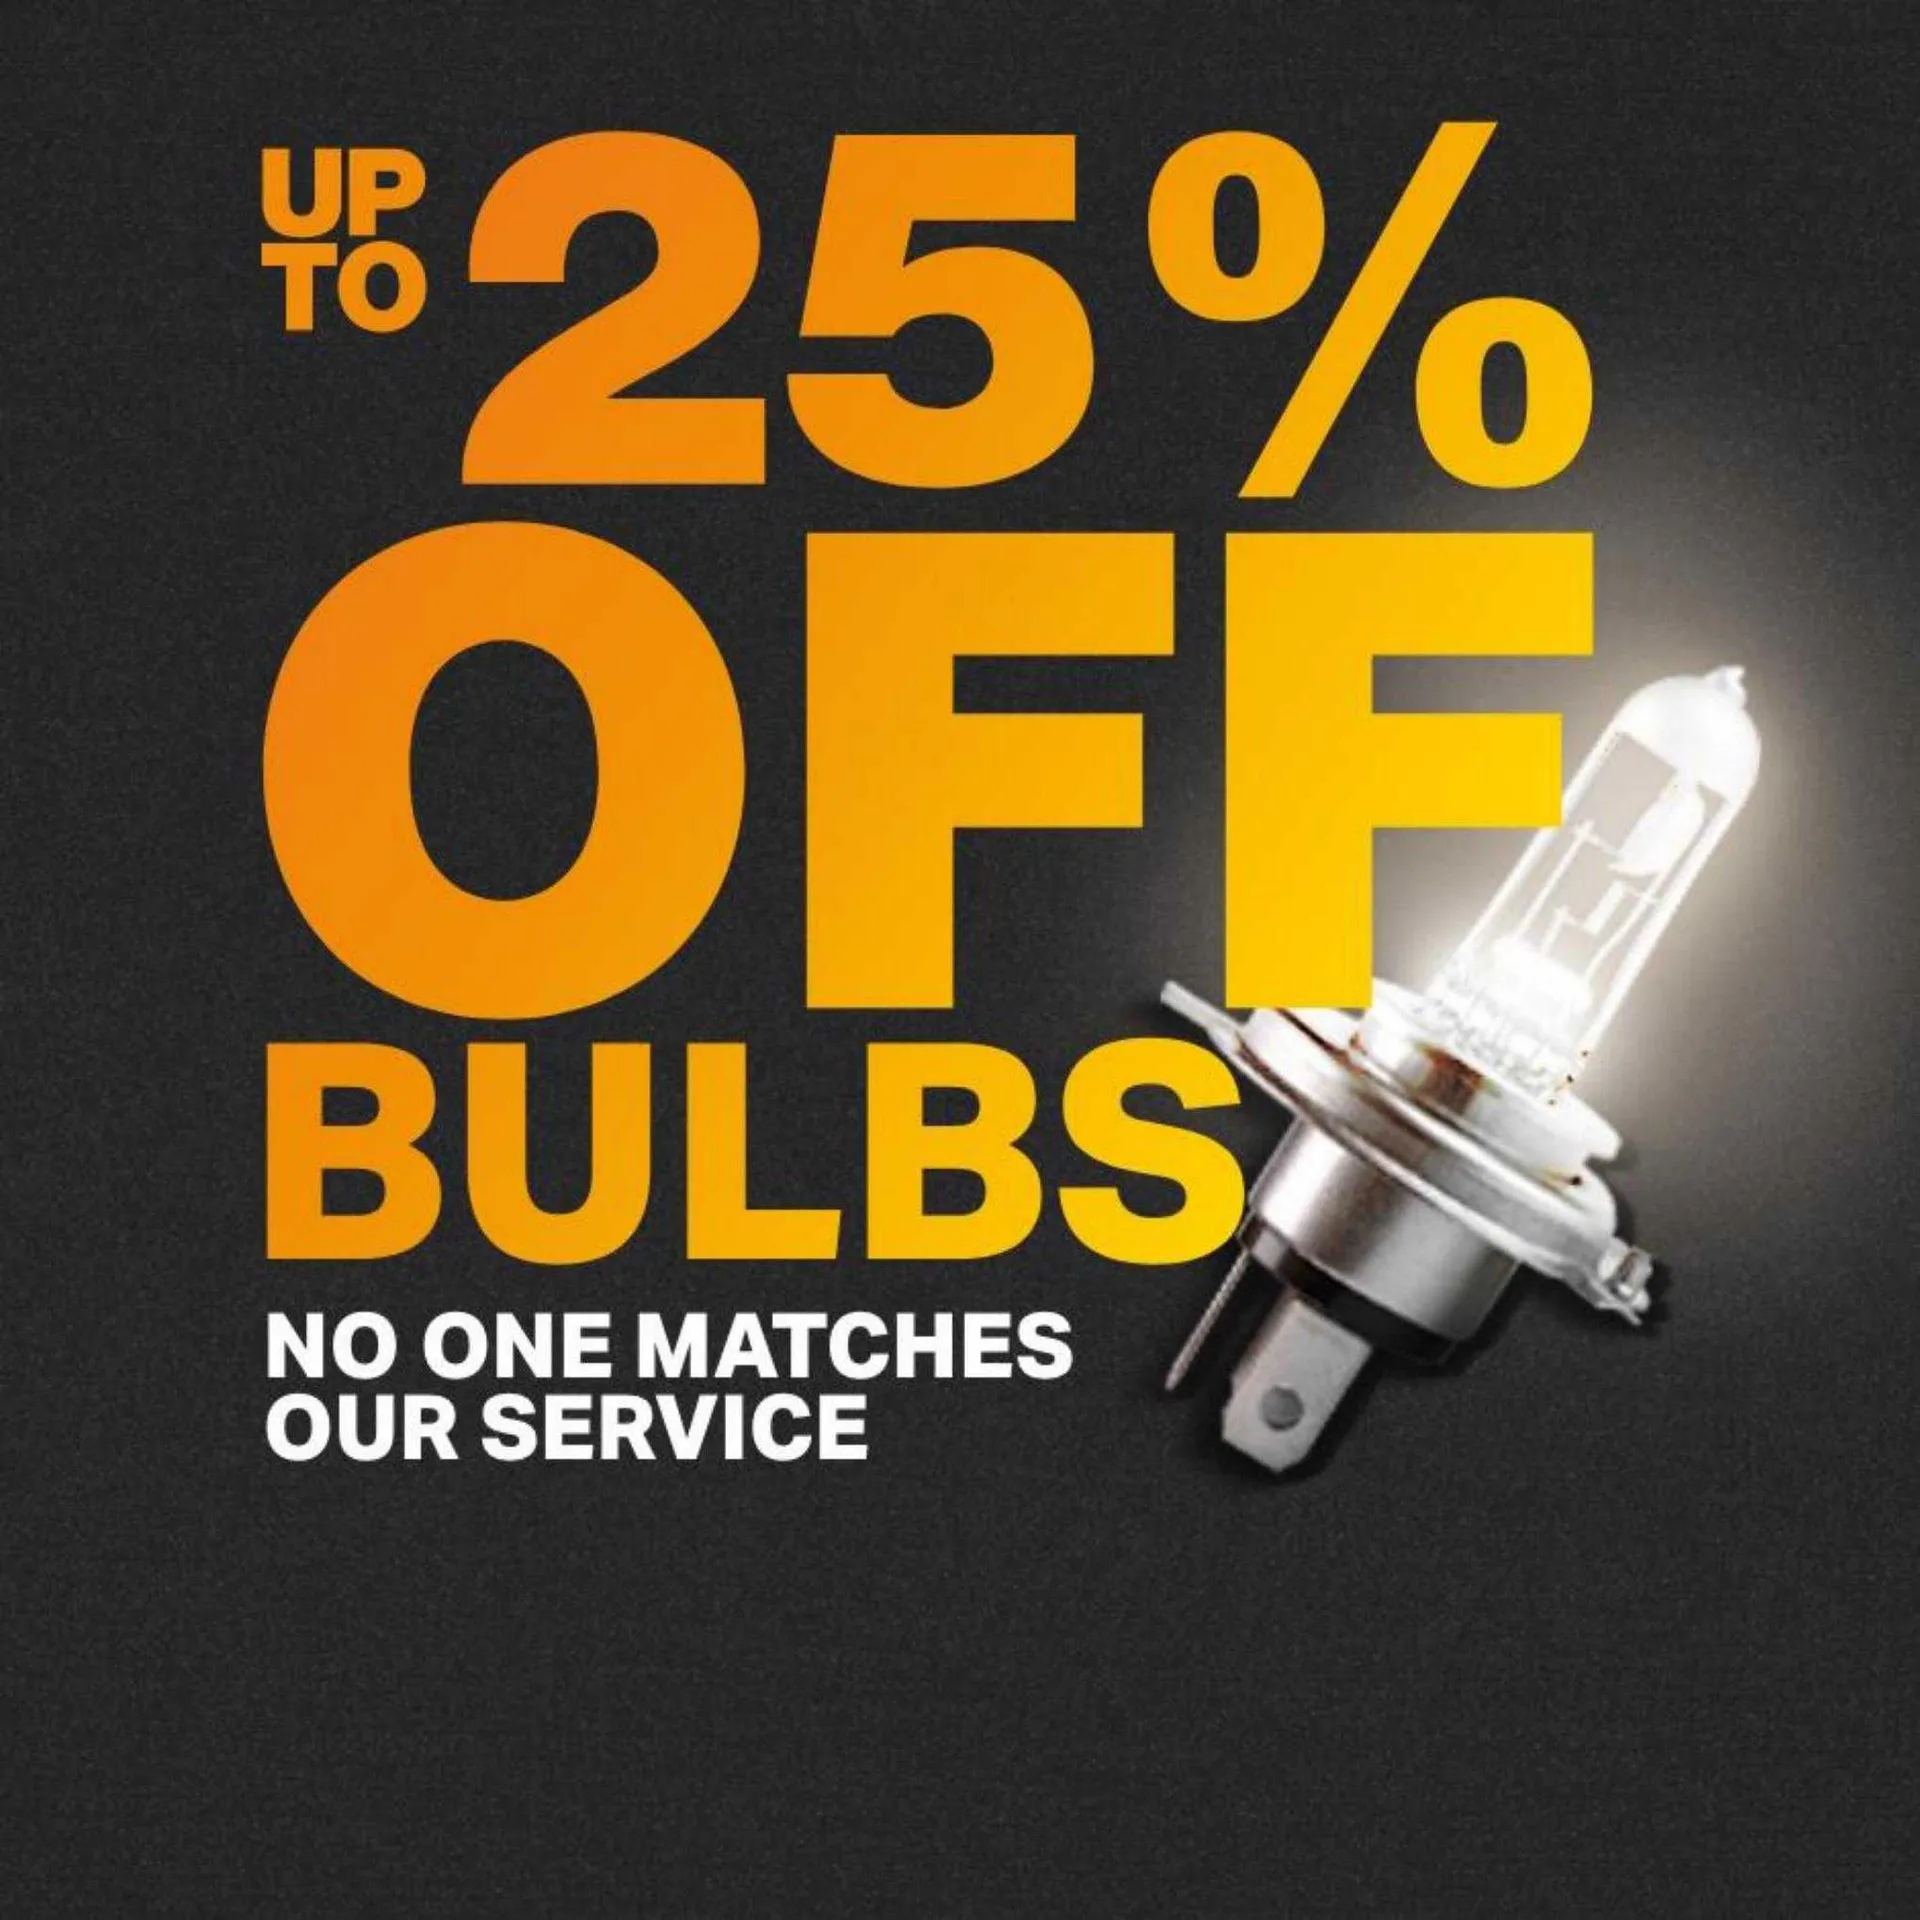 Halfords Weekly Offers - 3